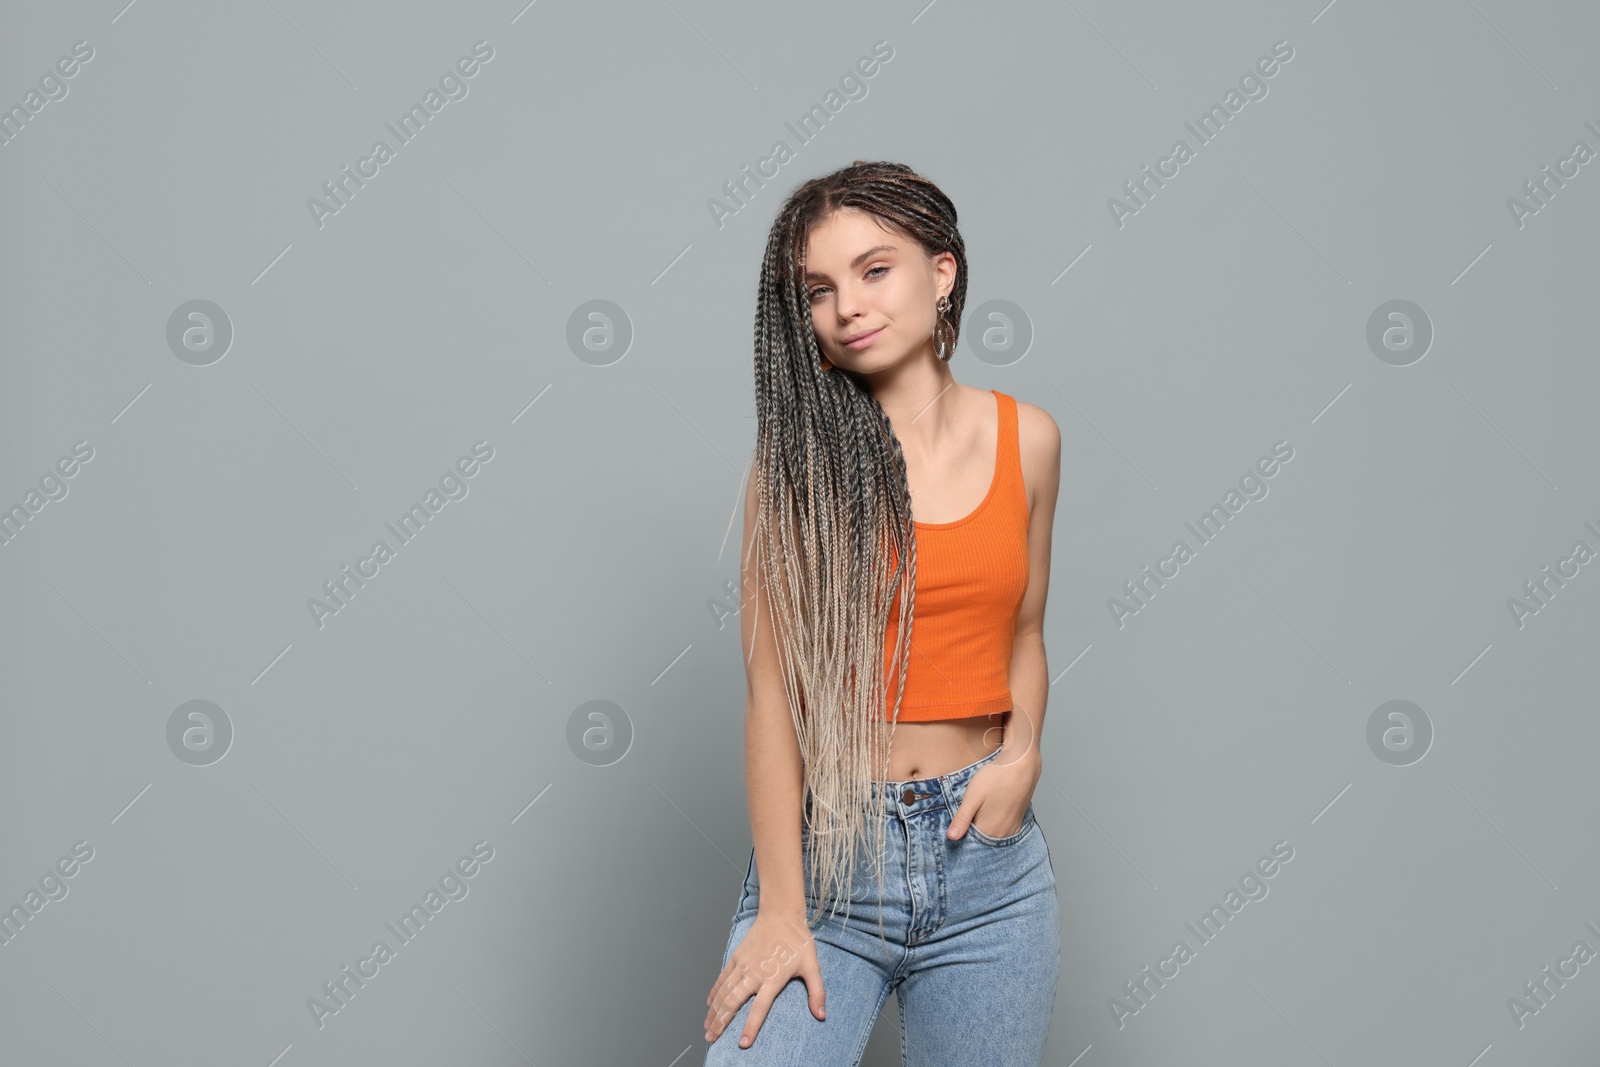 Photo of Beautiful woman with long african braids on grey background, space for text